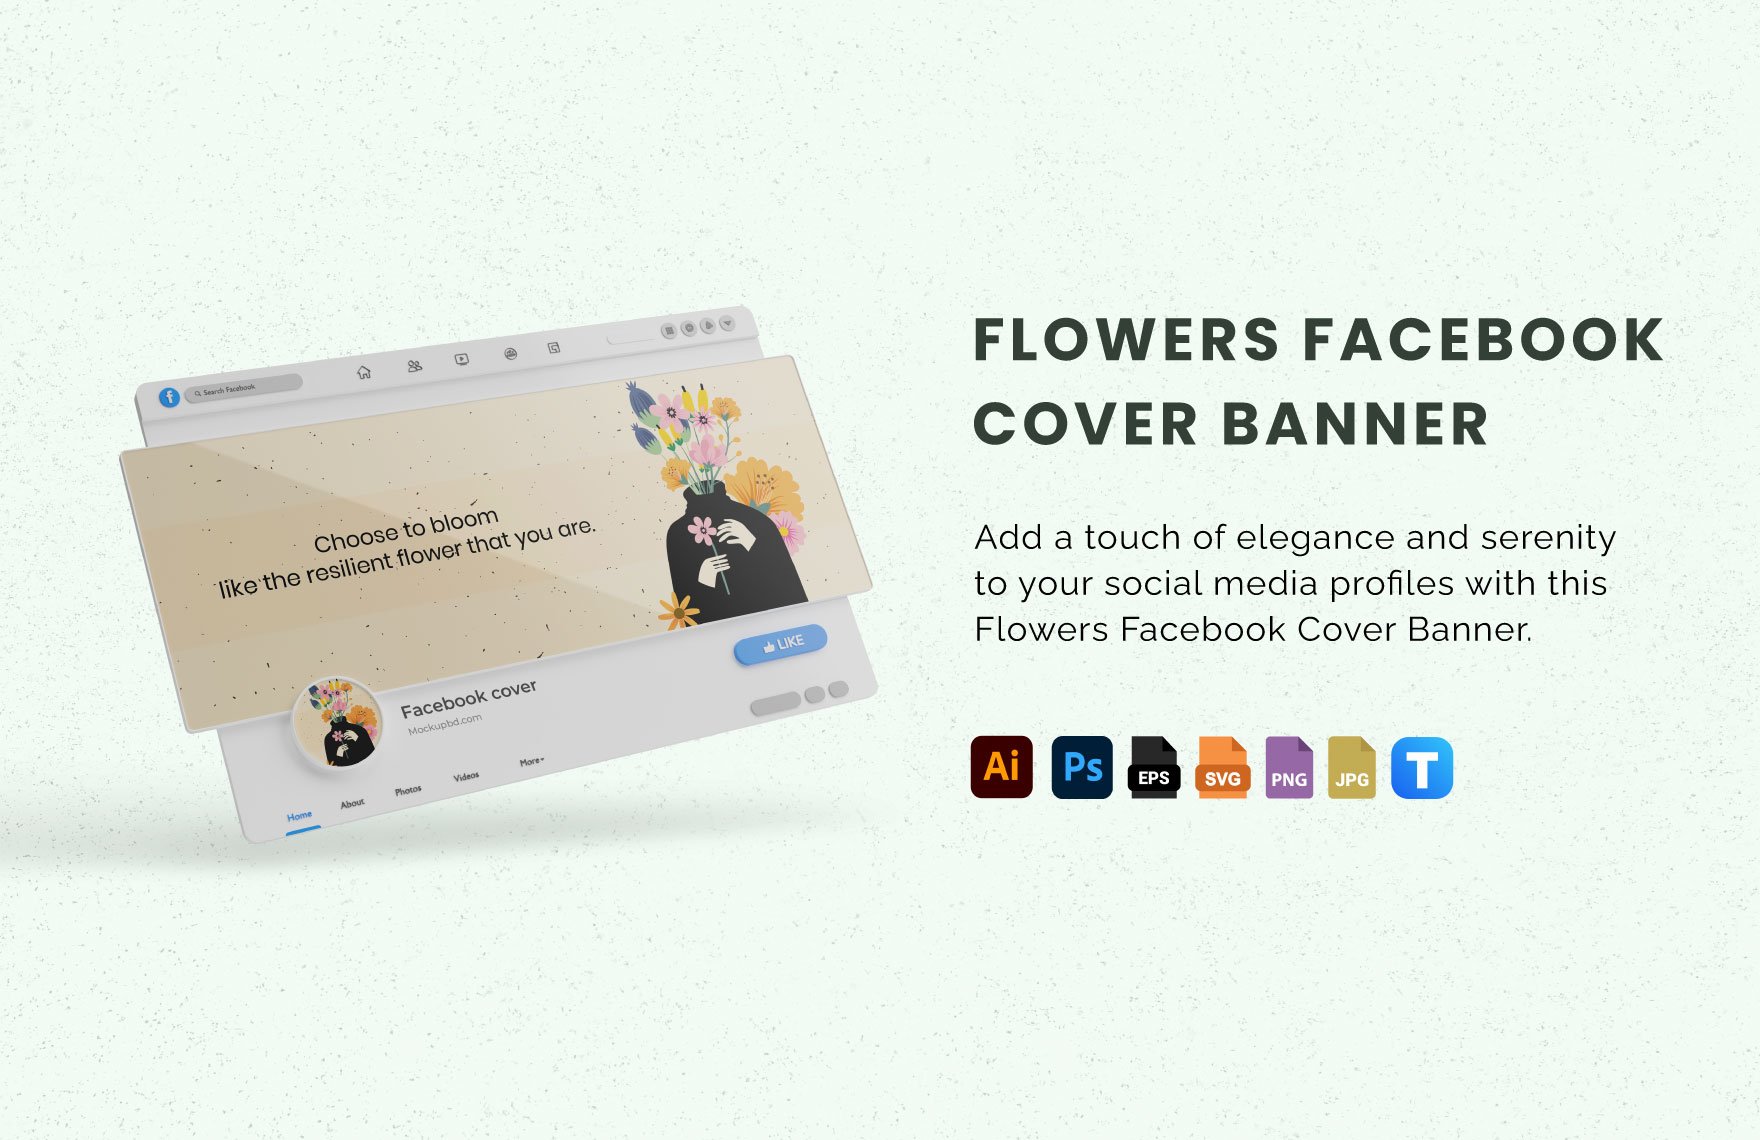 Flowers Facebook Cover Banner